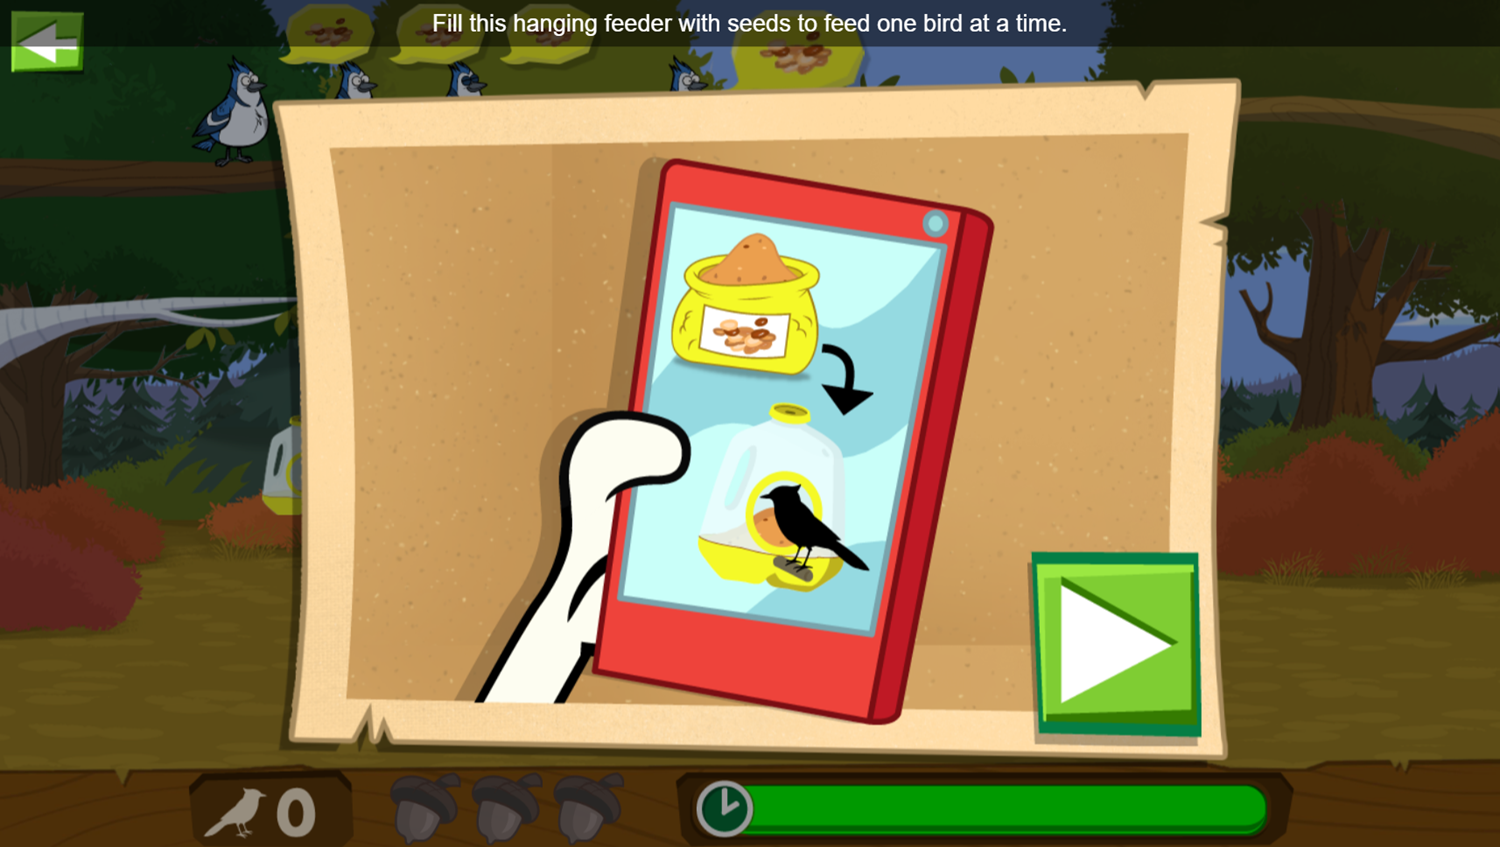 Nature Cat Fine Feathered Feast Game Feeding Information Screenshot.